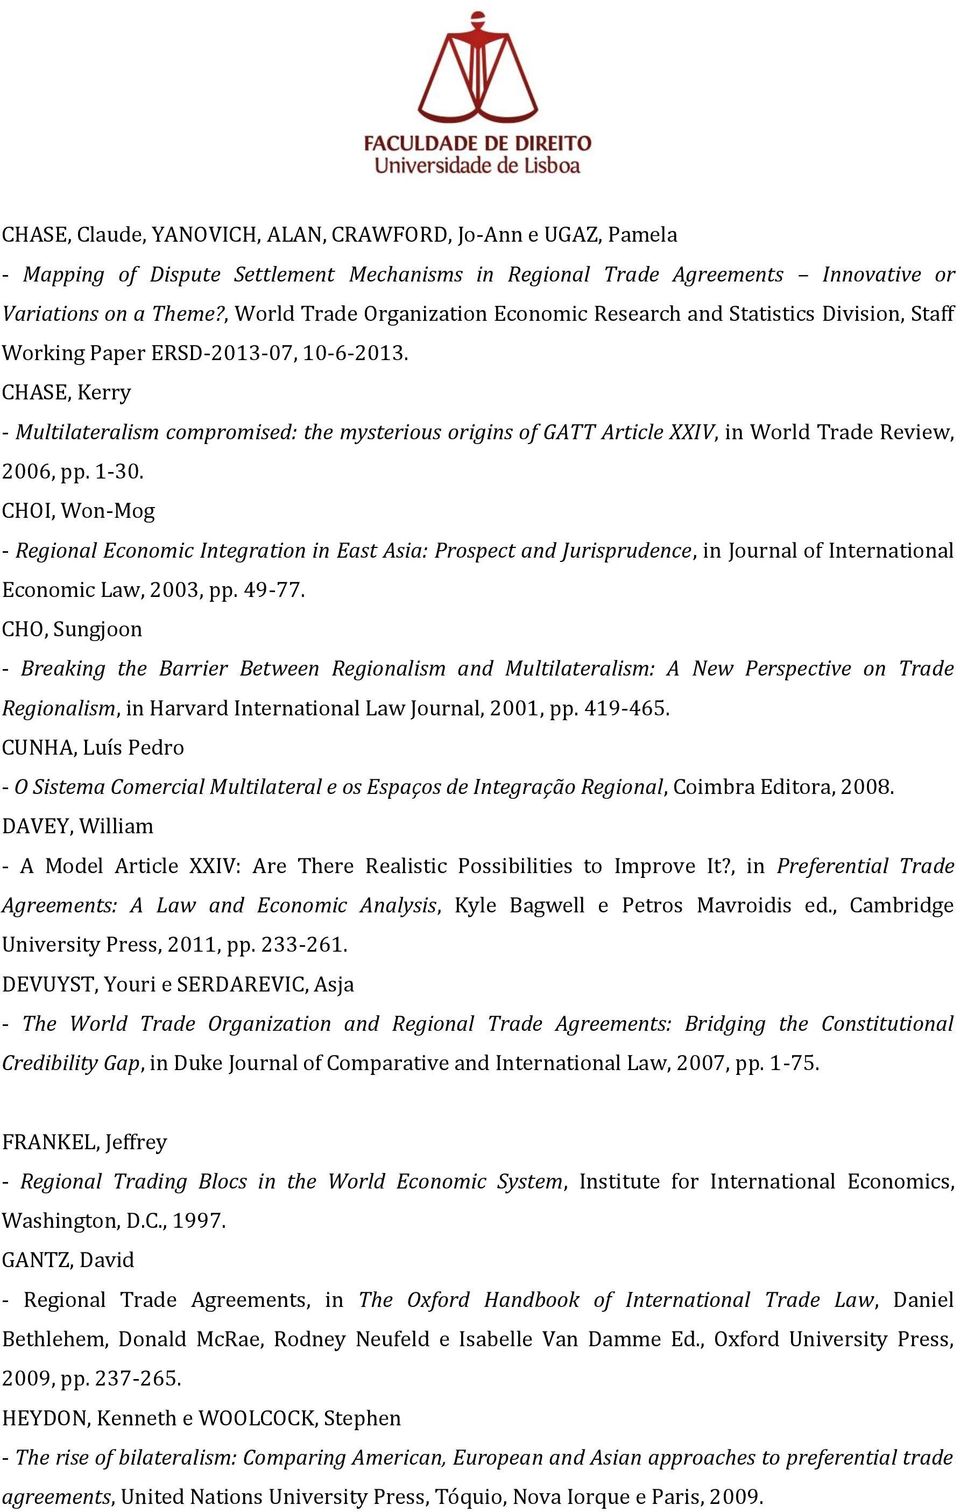 CHASE, Kerry - Multilateralism compromised: the mysterious origins of GATT Article XXIV, in World Trade Review, 2006, pp. 1-30.